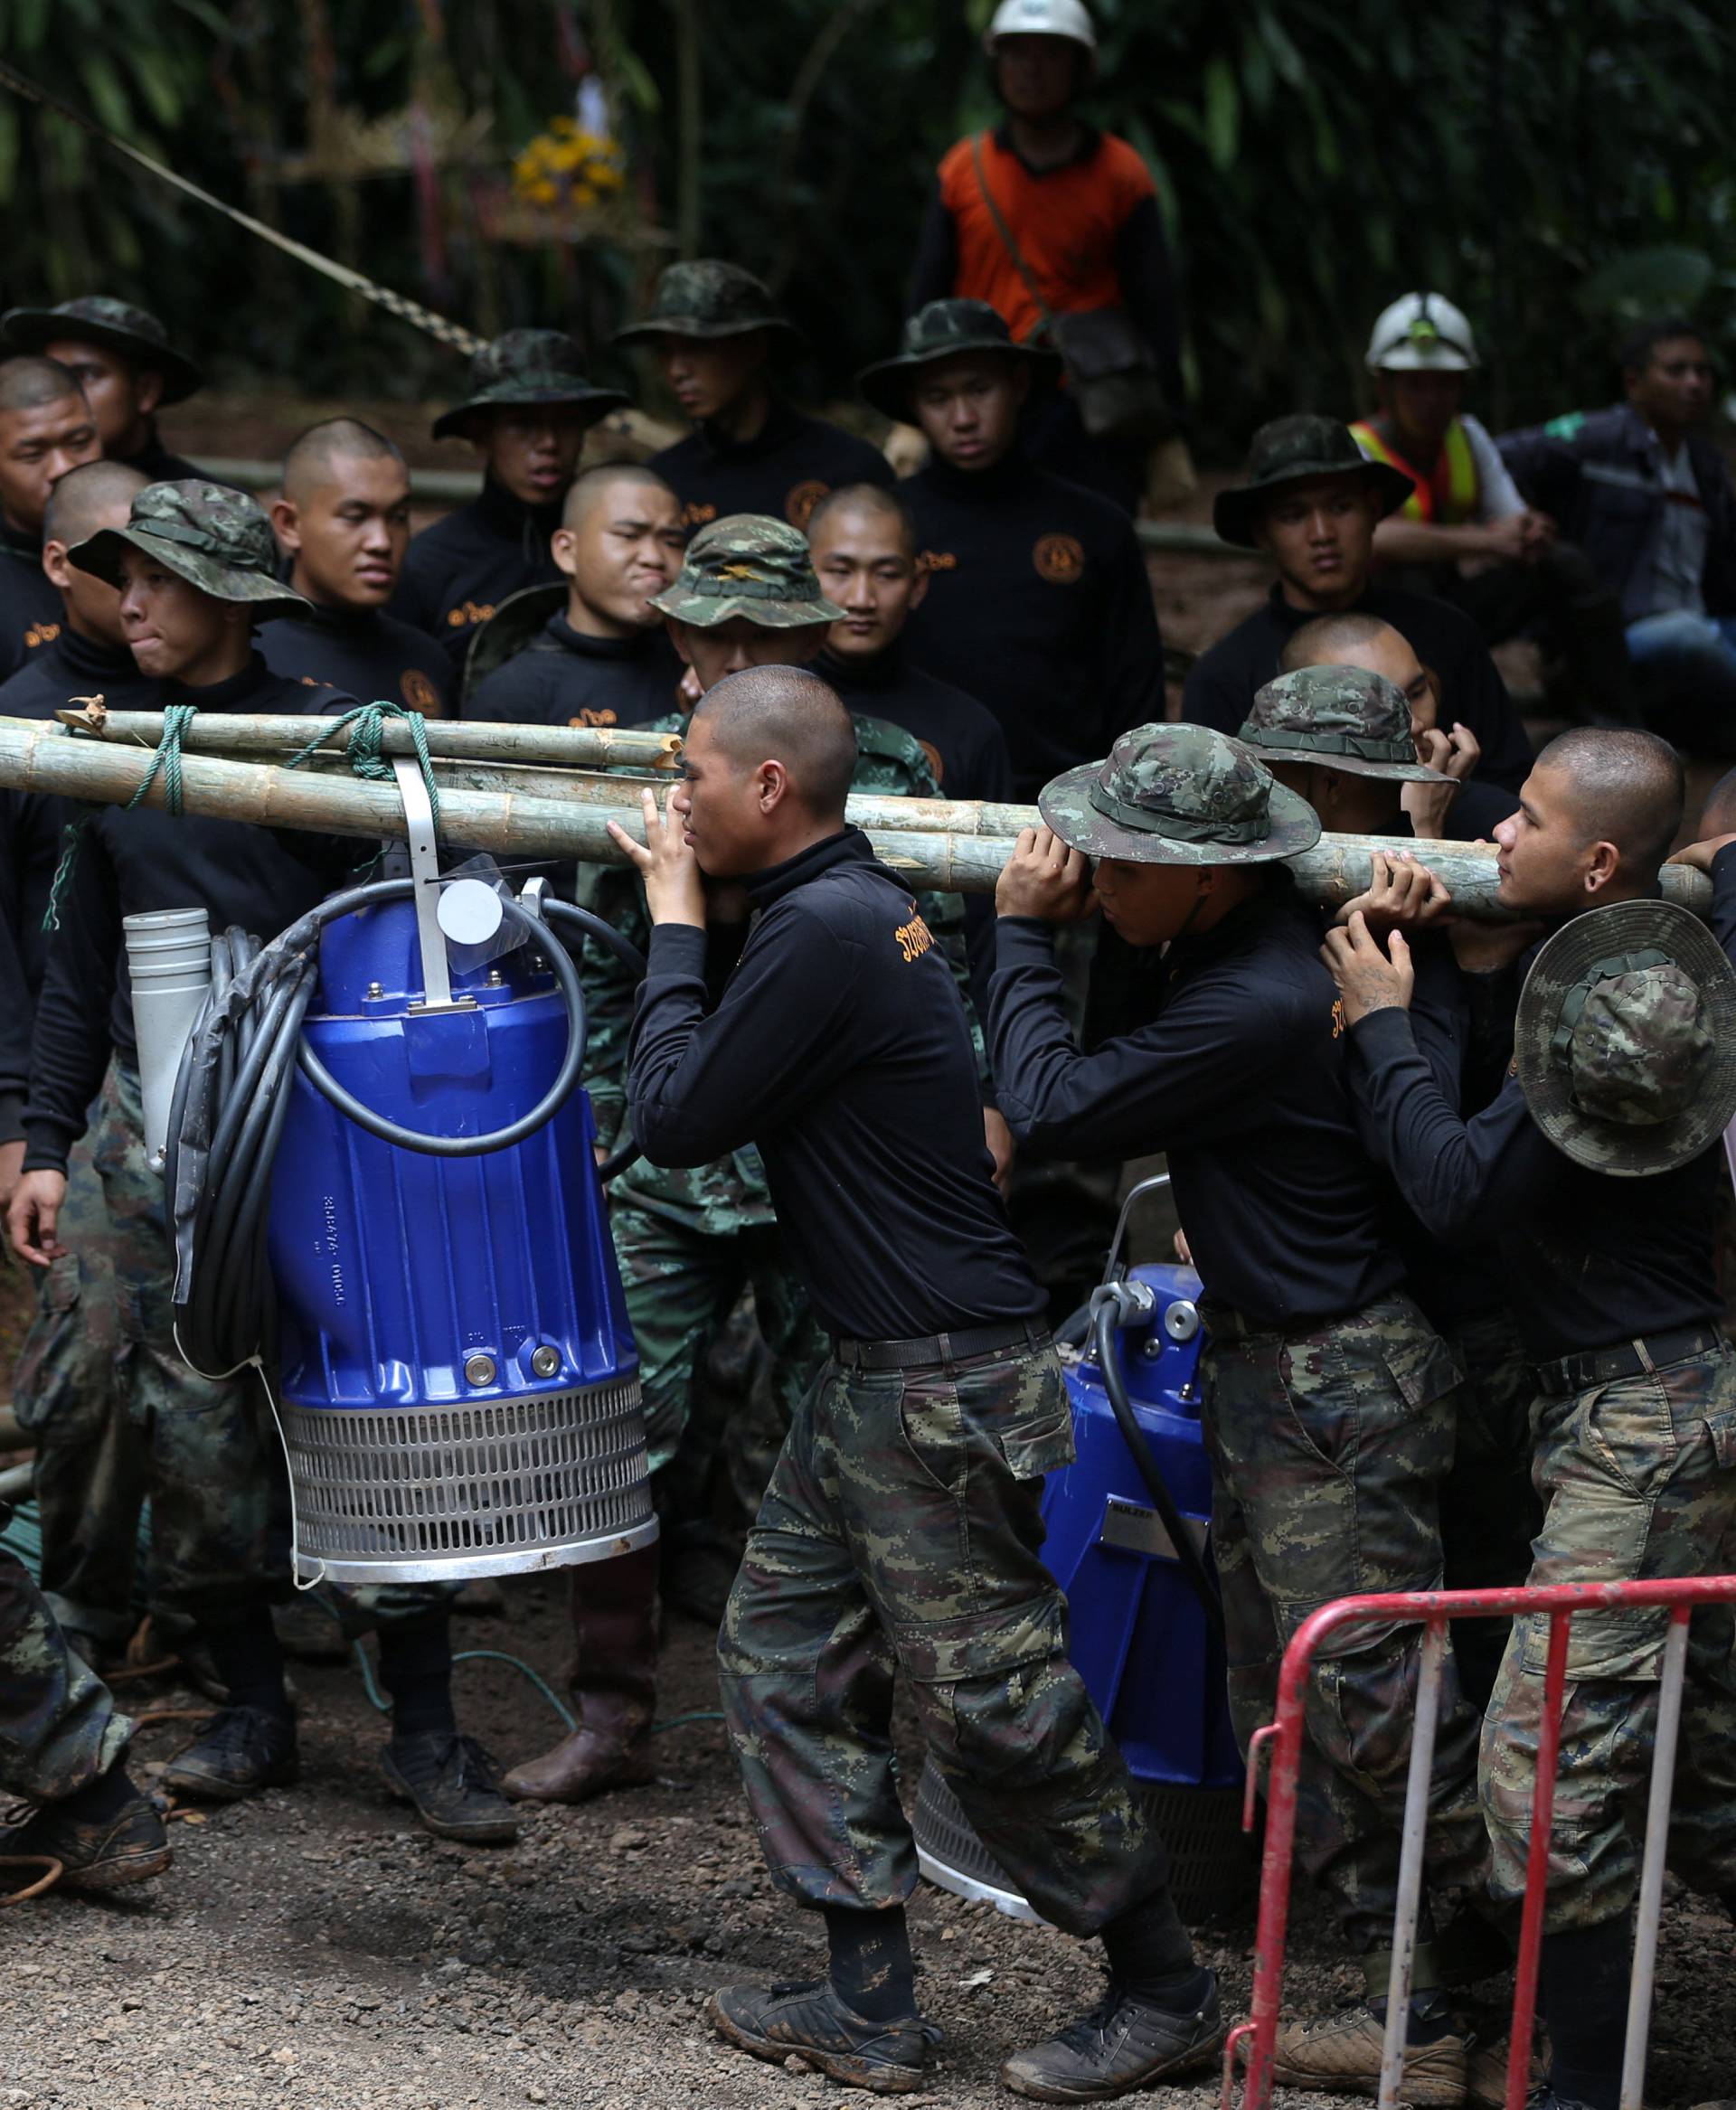 Military personnel carry a water pump machine as they enter the Tham Luang cave complex, where 12 boys and their soccer coach are trapped, in the northern province of Chiang Rai